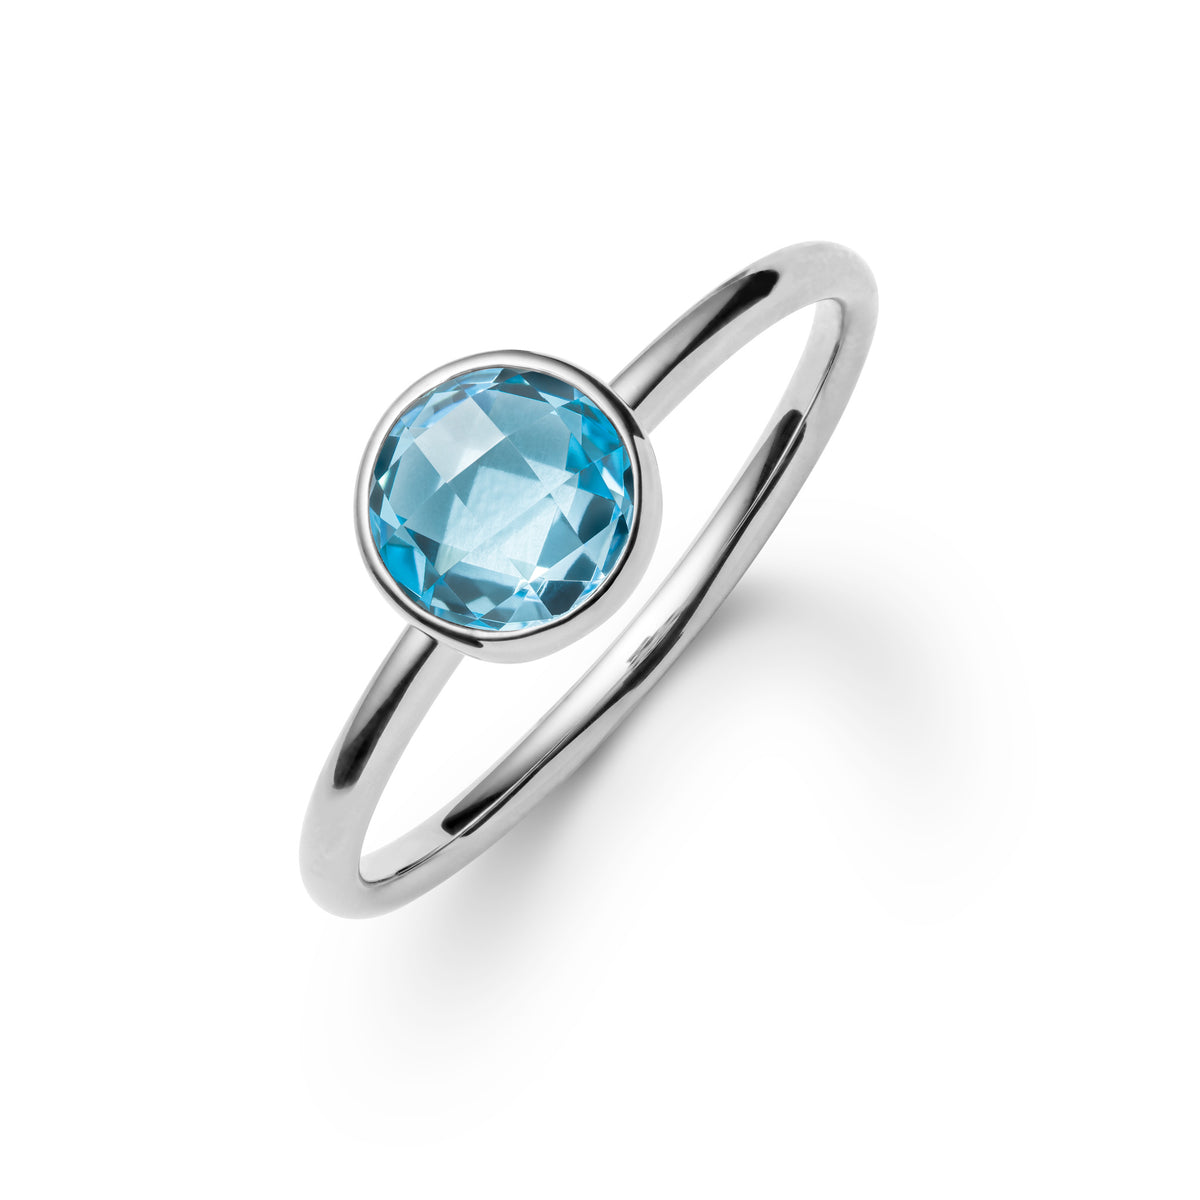 Blue Topaz Stone Ring: A Sparkling Elegance for All Occasions